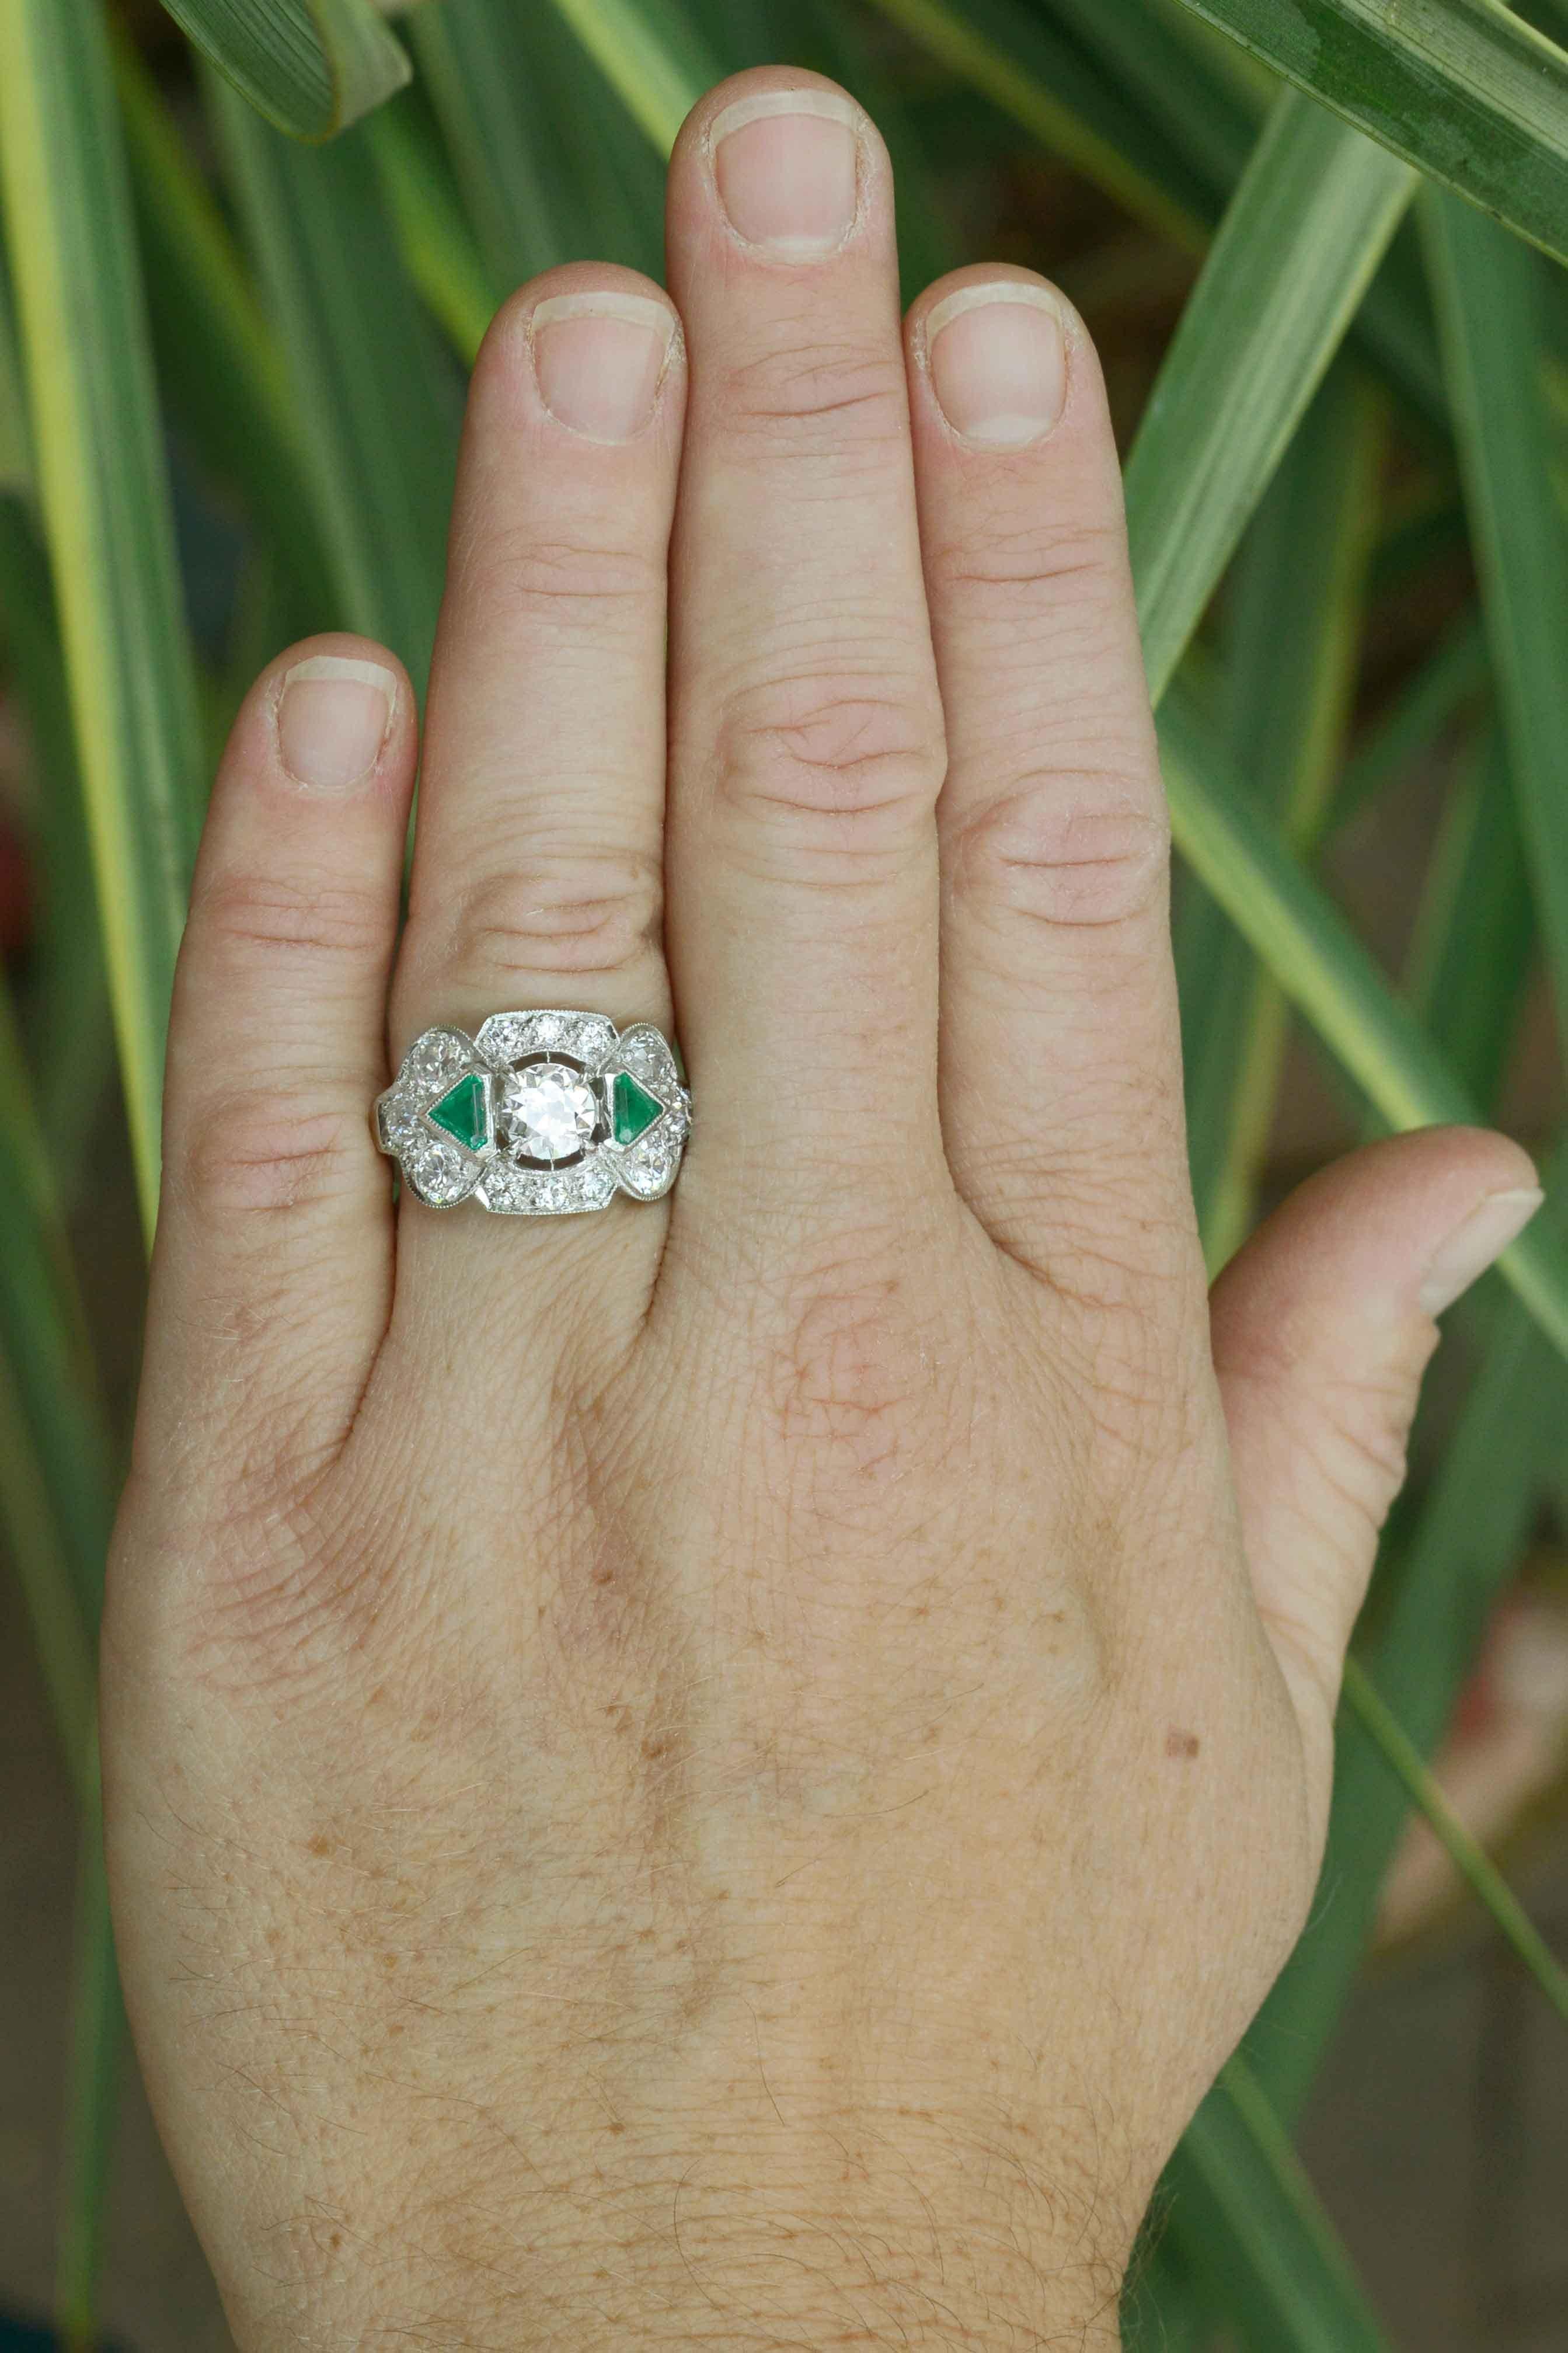 A unique Art Deco diamond and emerald three stone engagement ring. Centered by a captivatingly brilliant 1 carat old European diamond flanked by a pair of lush, vivid green emerald triangles. As if that wasn't enough, this 1920s Jazz Age heirloom is